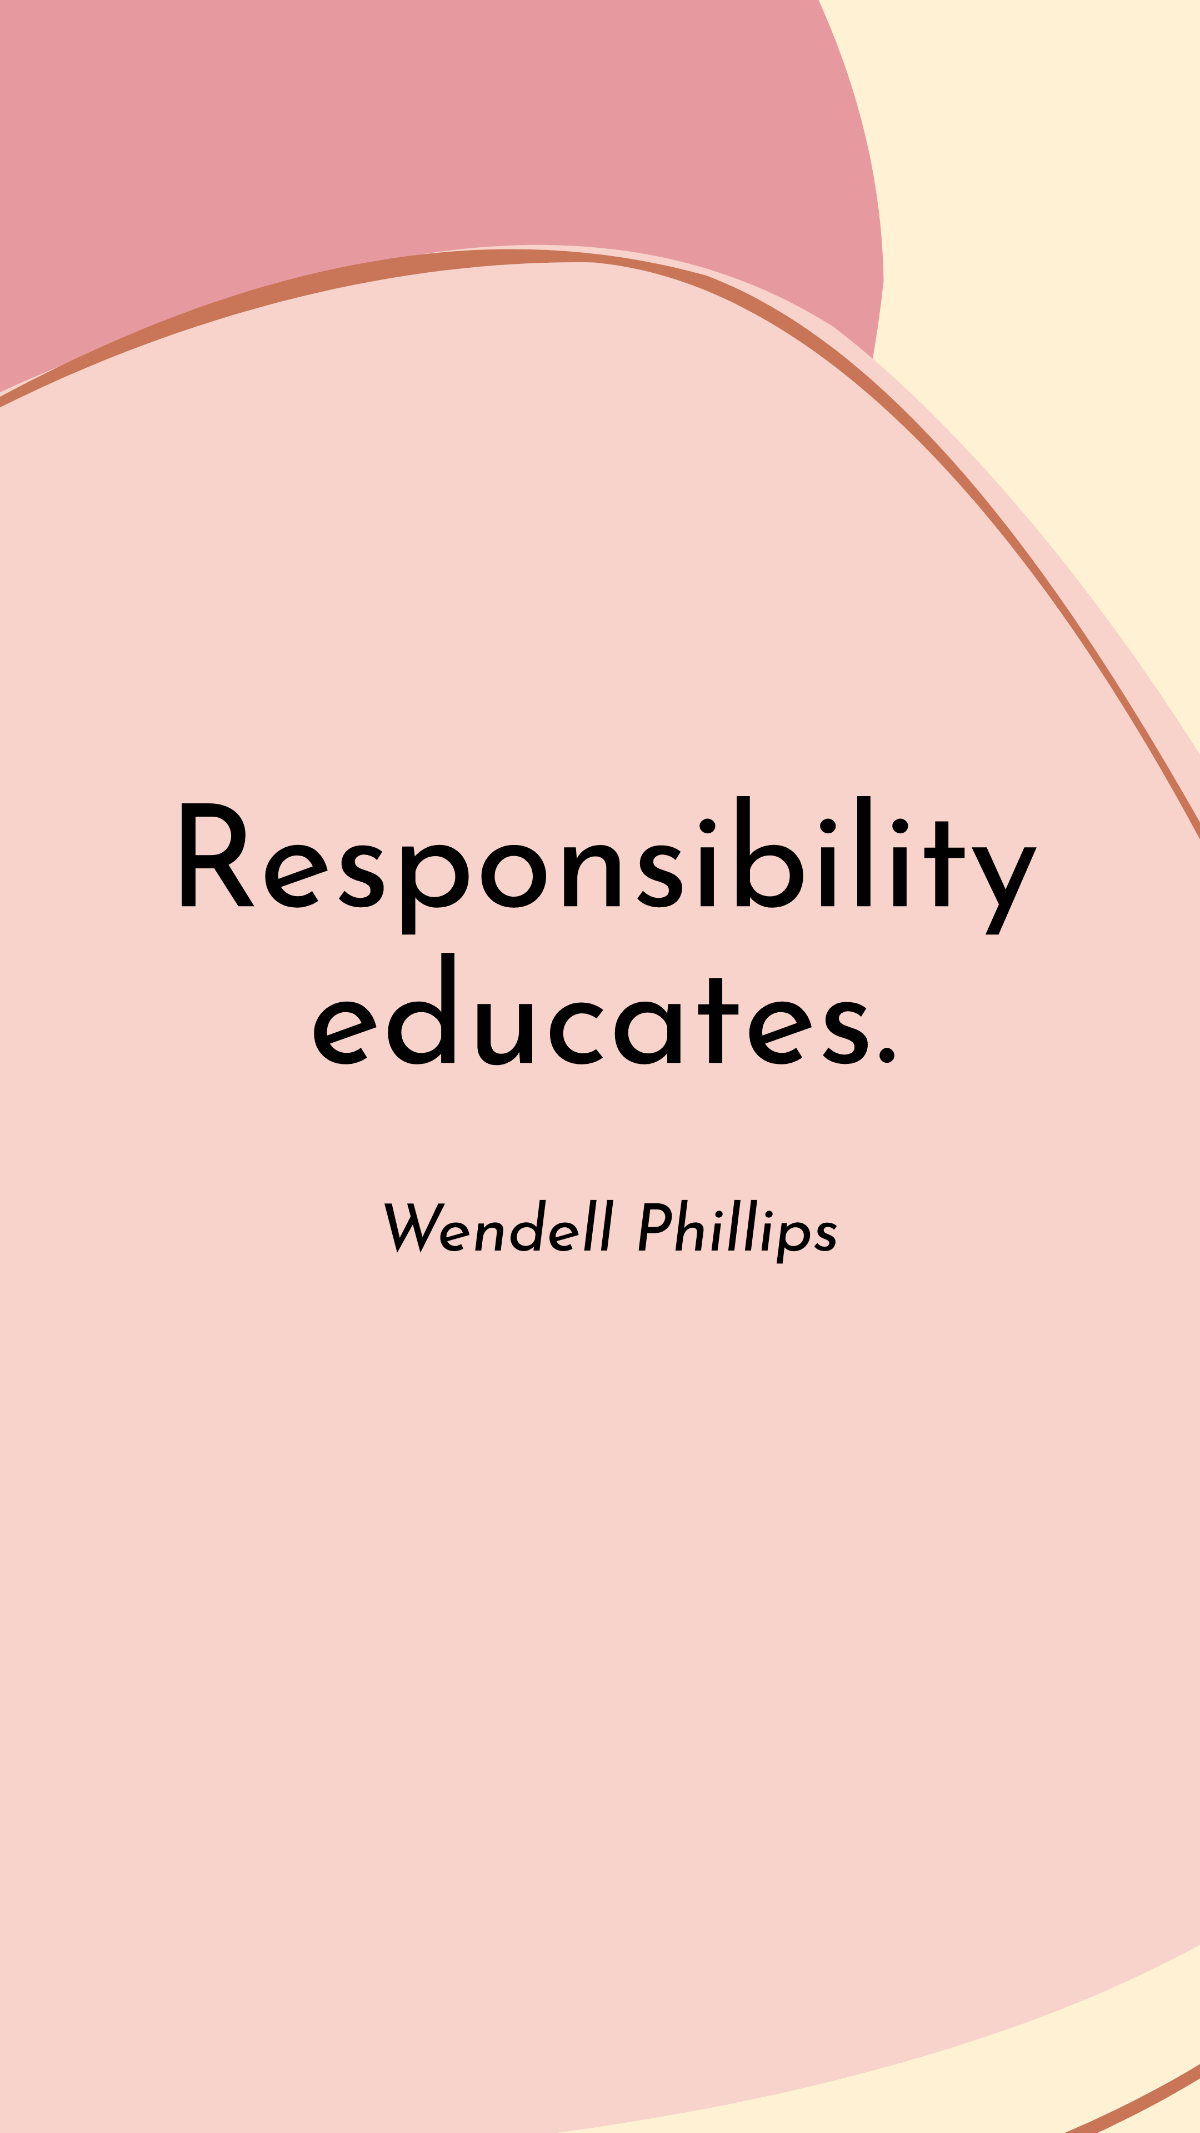 Wendell Phillips - Responsibility educates. Template